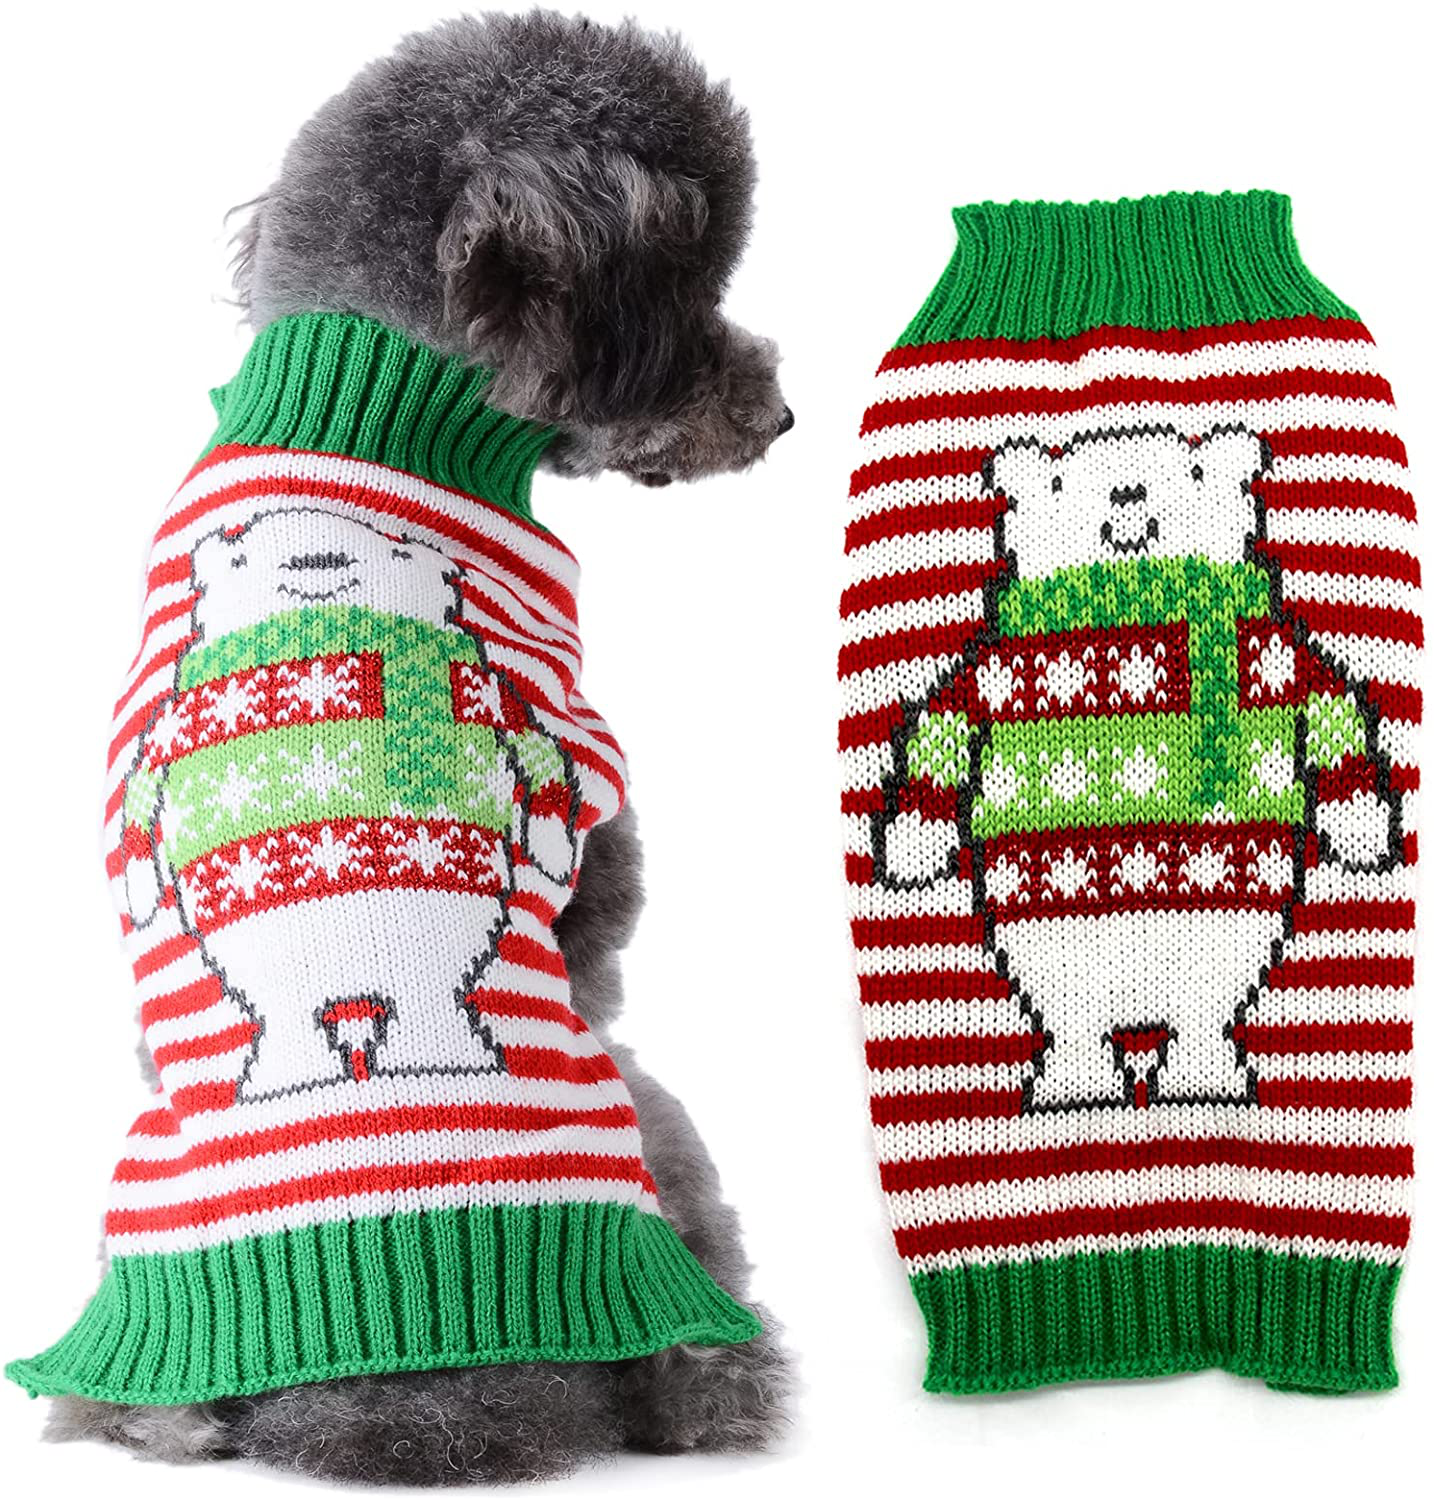 DOGGYZSTYLE Pet Dog Sweaters Cute Animal Printed Winter Warm Puppy Knitted Clothes Cat Jumpers Jacket Coat Apparel